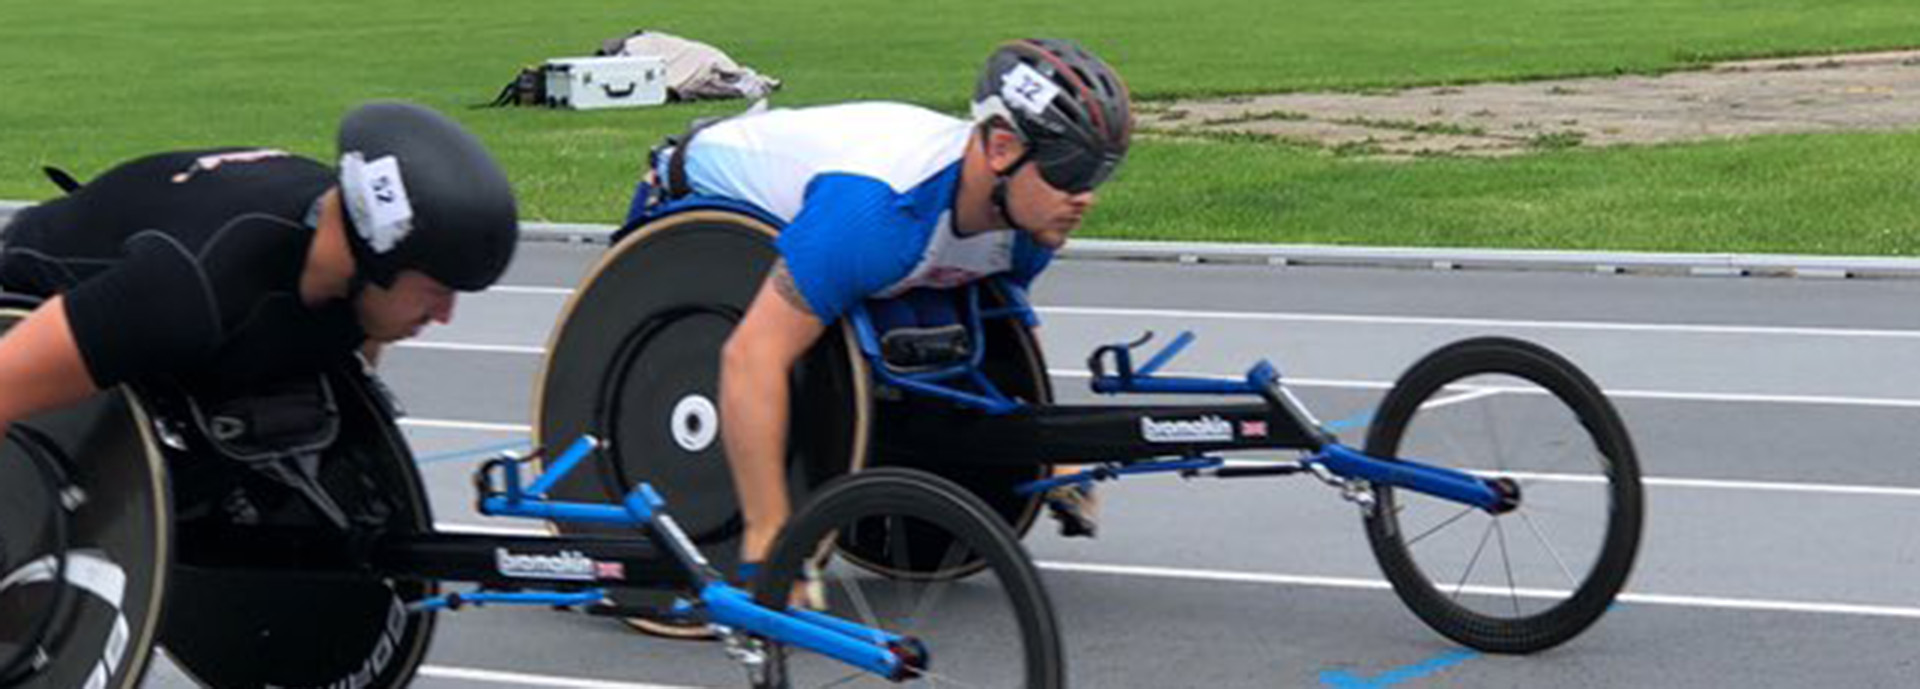 Ben Rowlings in racing chair on track